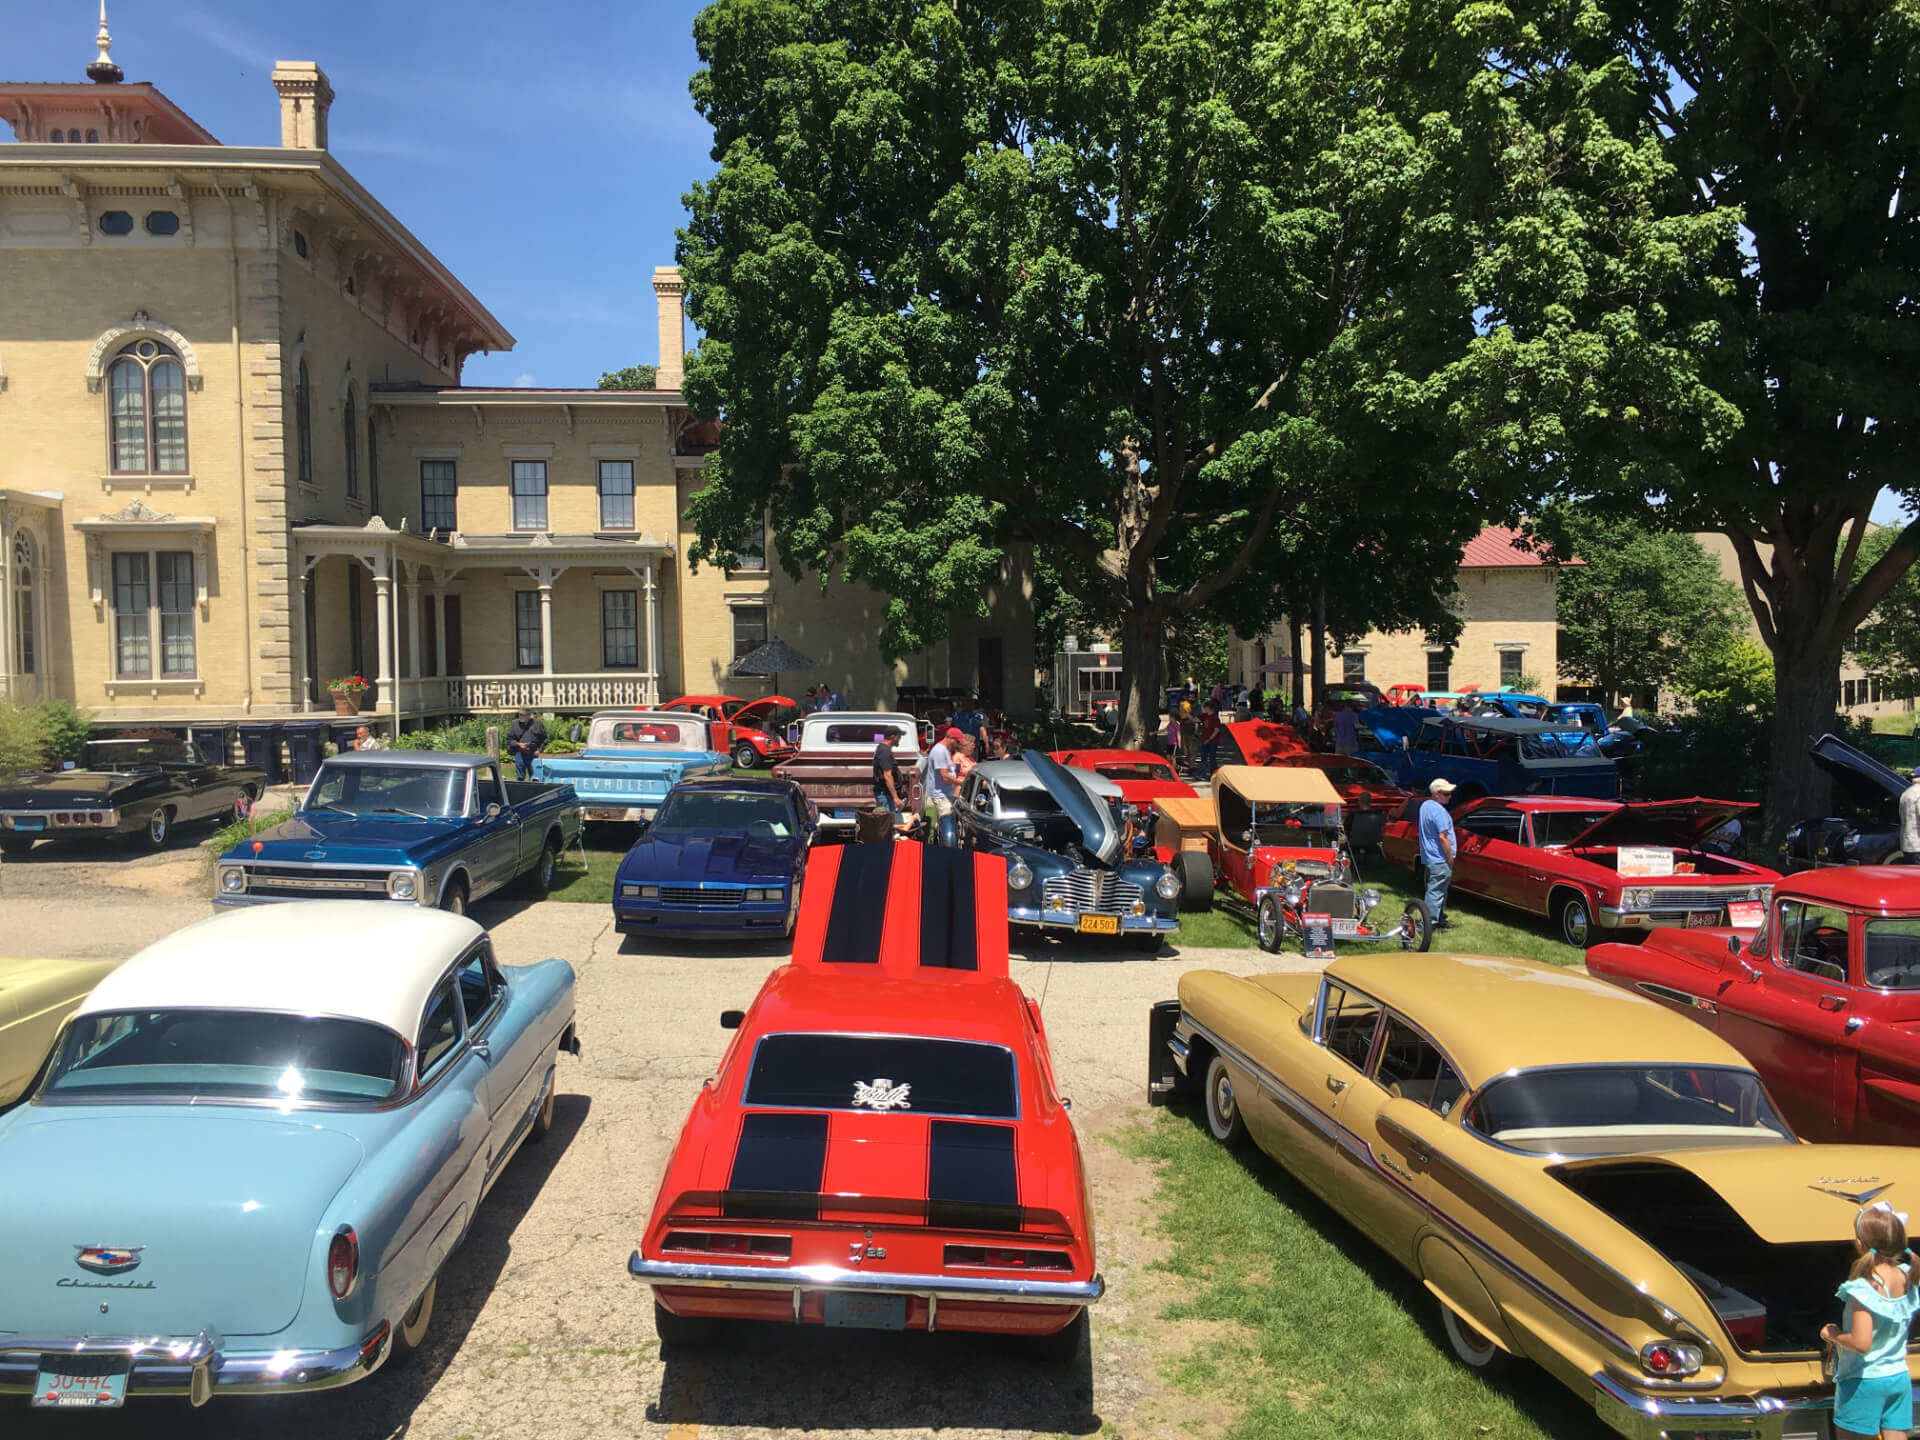 A view of several vintage cars on display at the Rock County Historical Society campus in Janesville, Wisconsin.